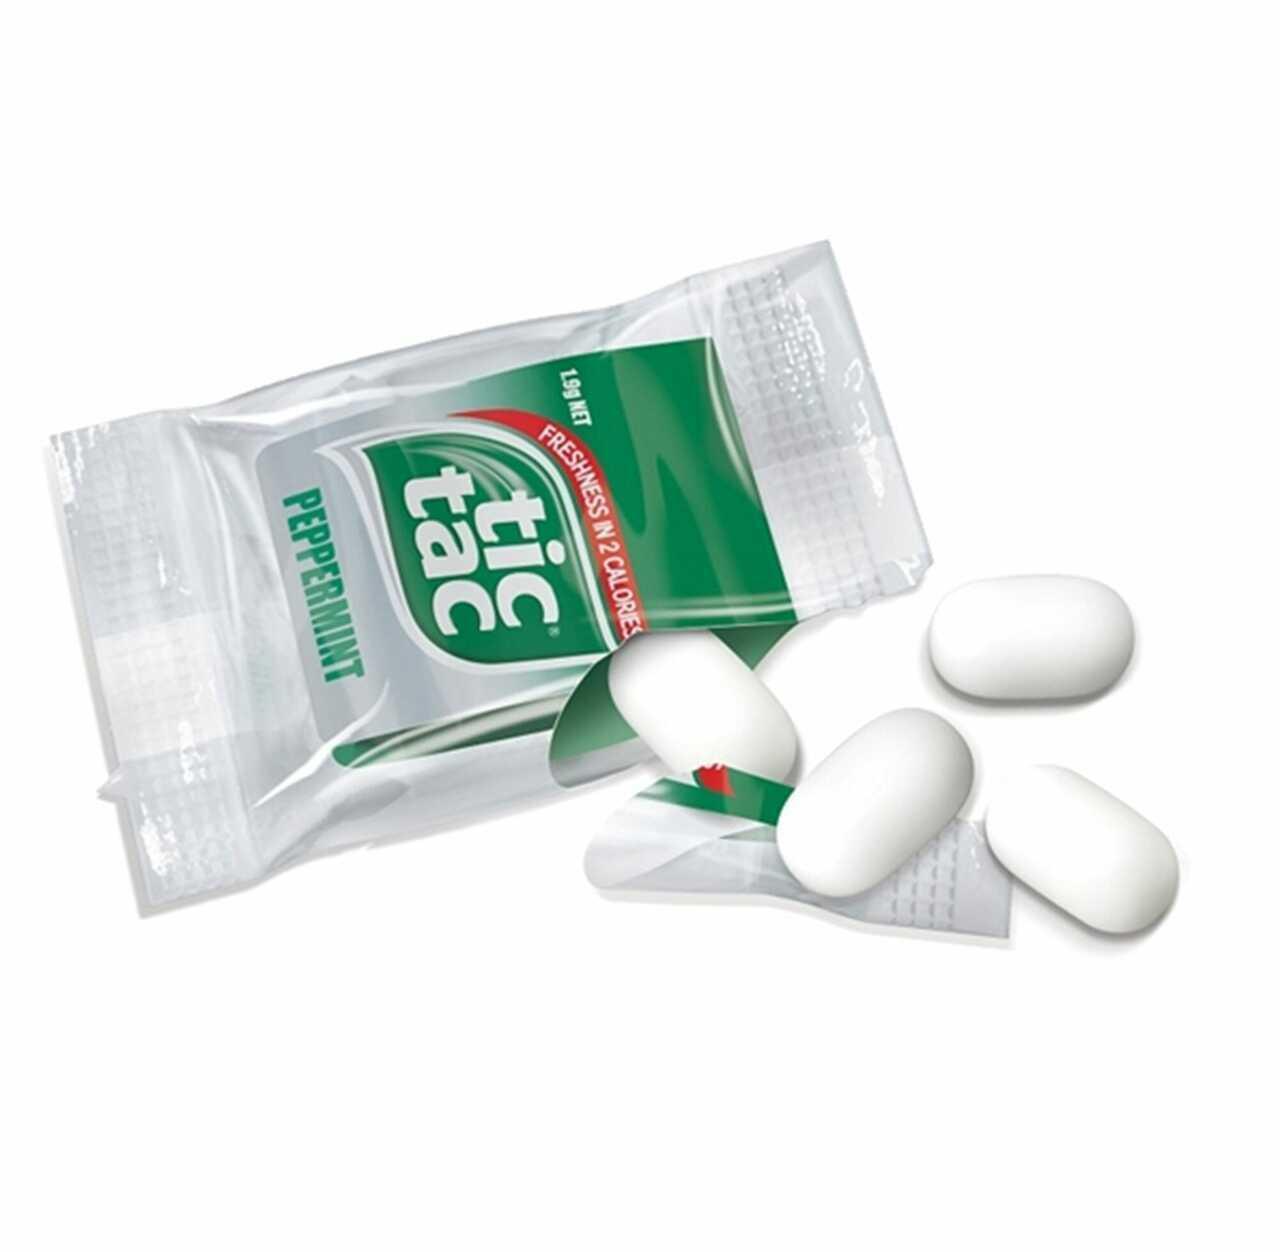 Tic Tac Pillow Packs: Individually Wrapped Tic Tac Packs - 100's - Vending Superstore